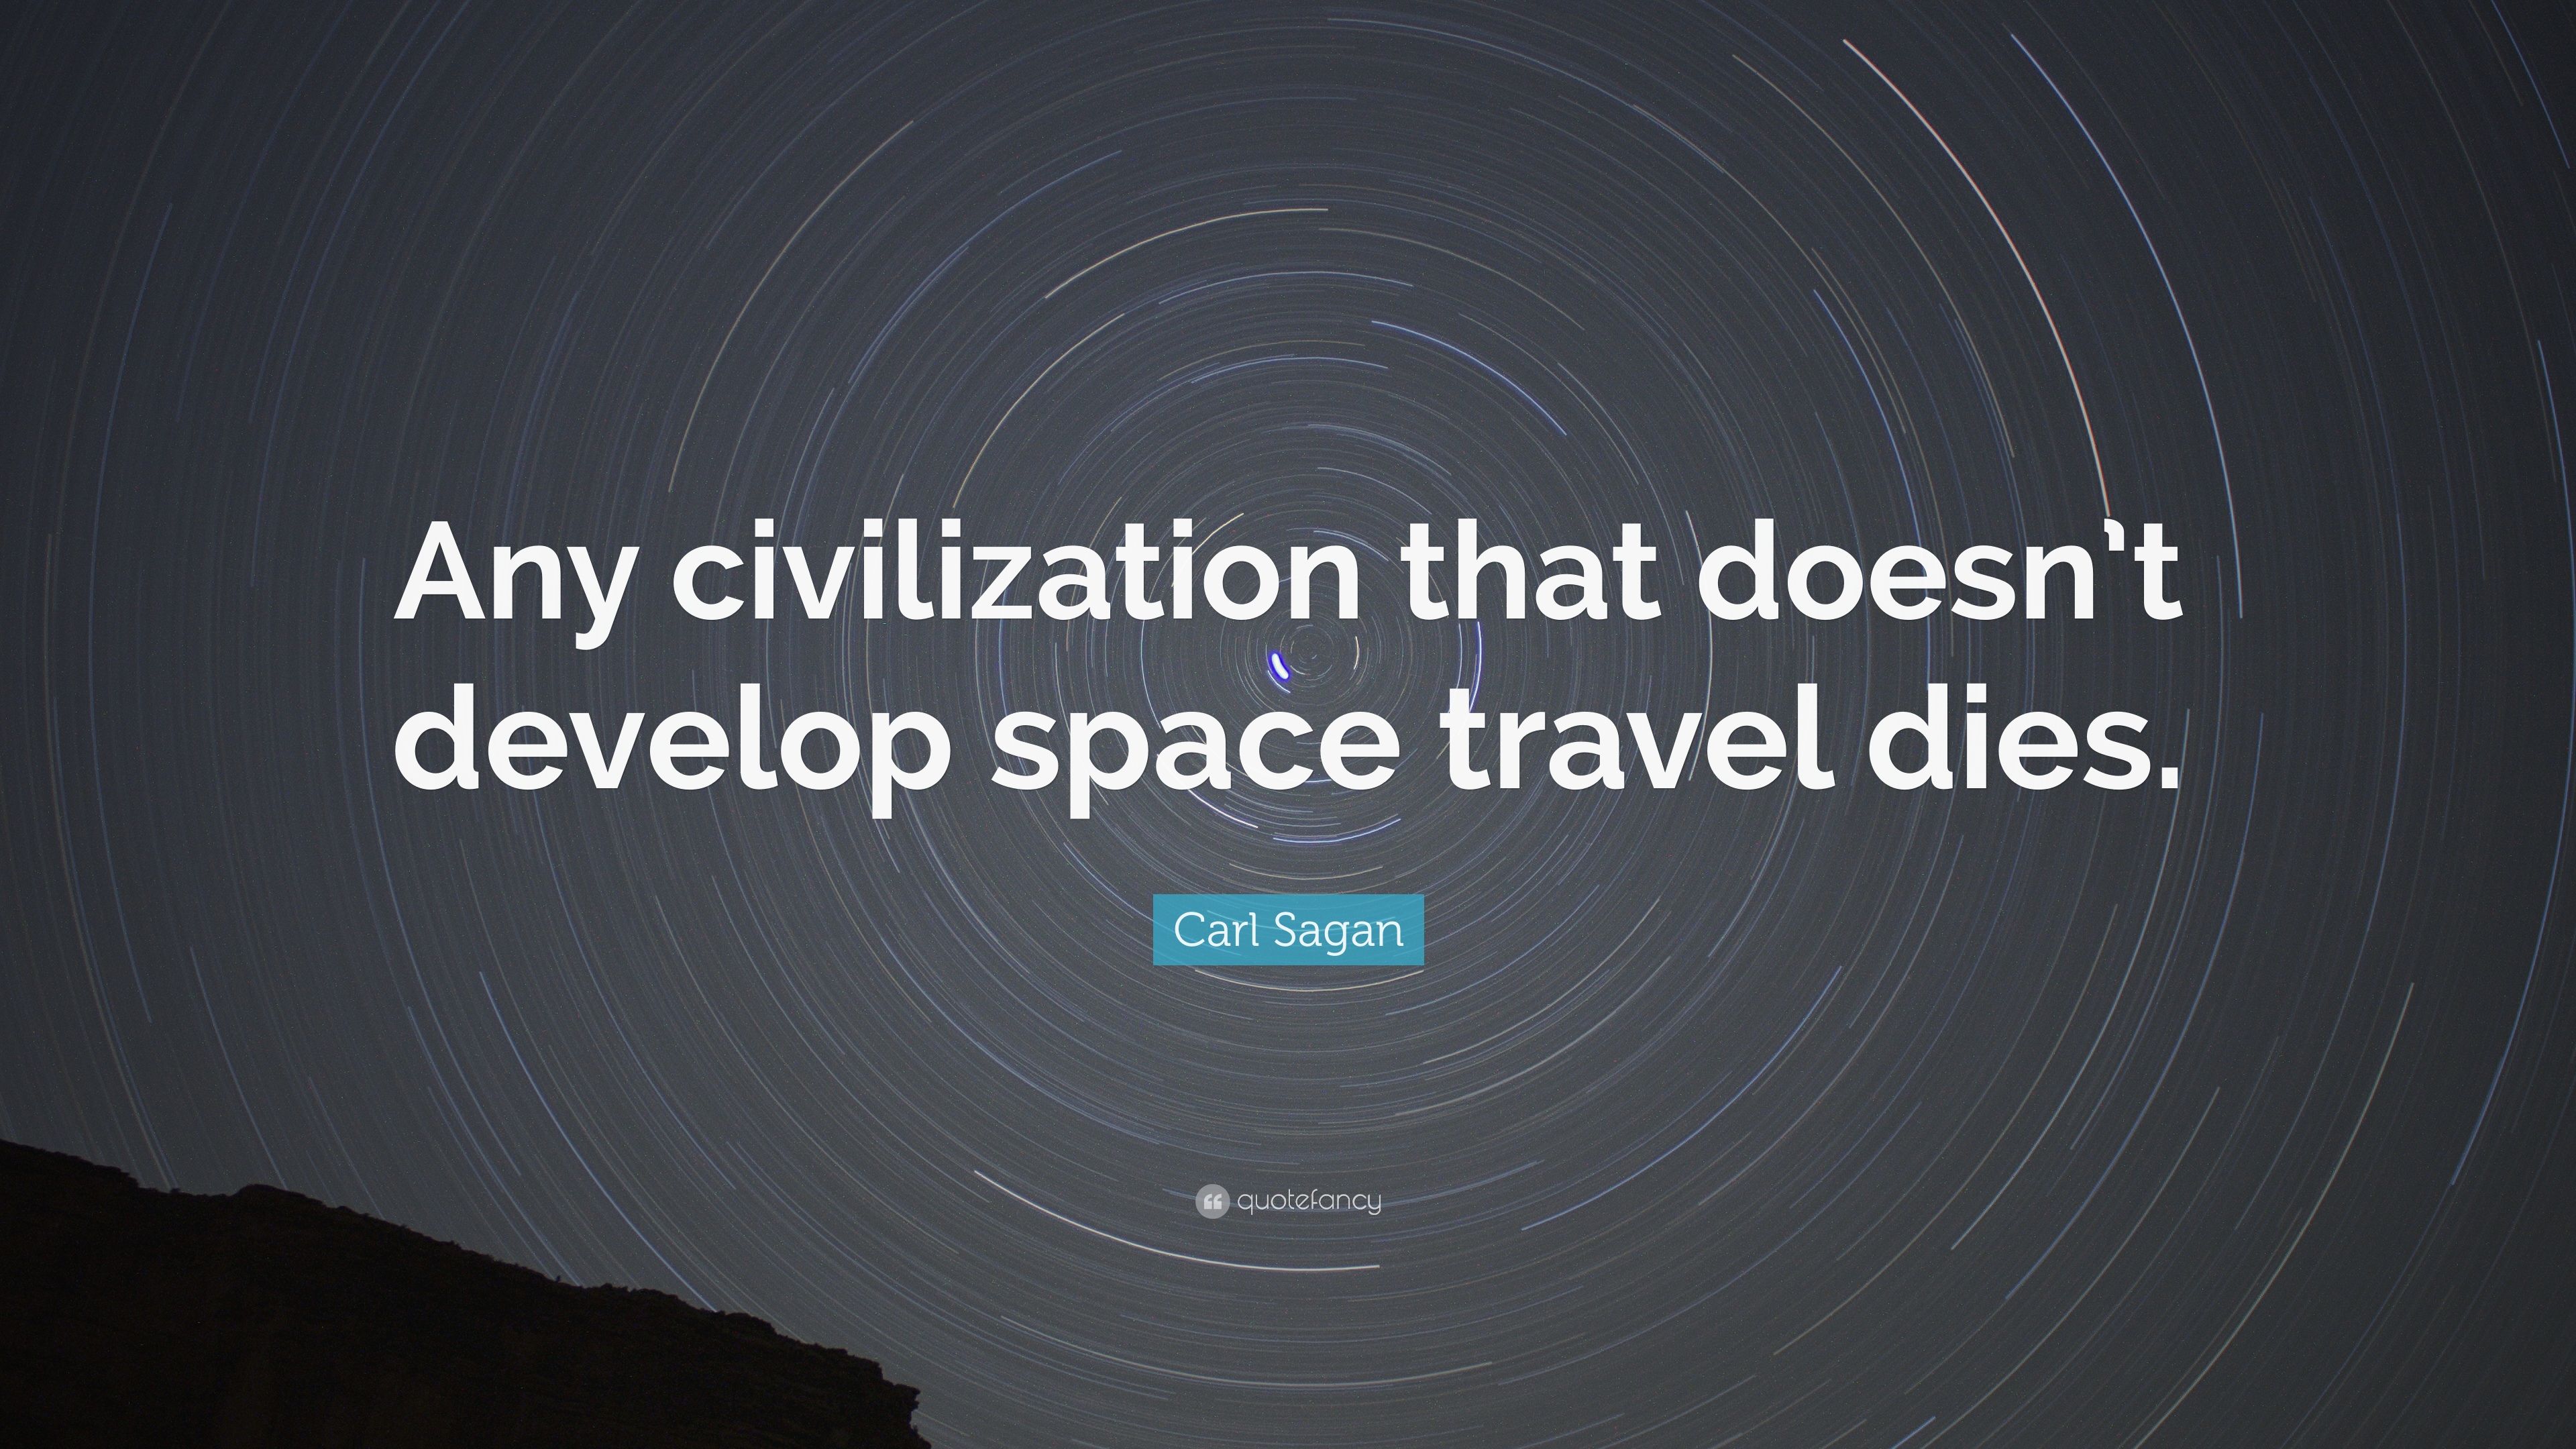 Carl Sagan Quote: “Any civilization that doesn't develop space travel dies.” (9 wallpaper)